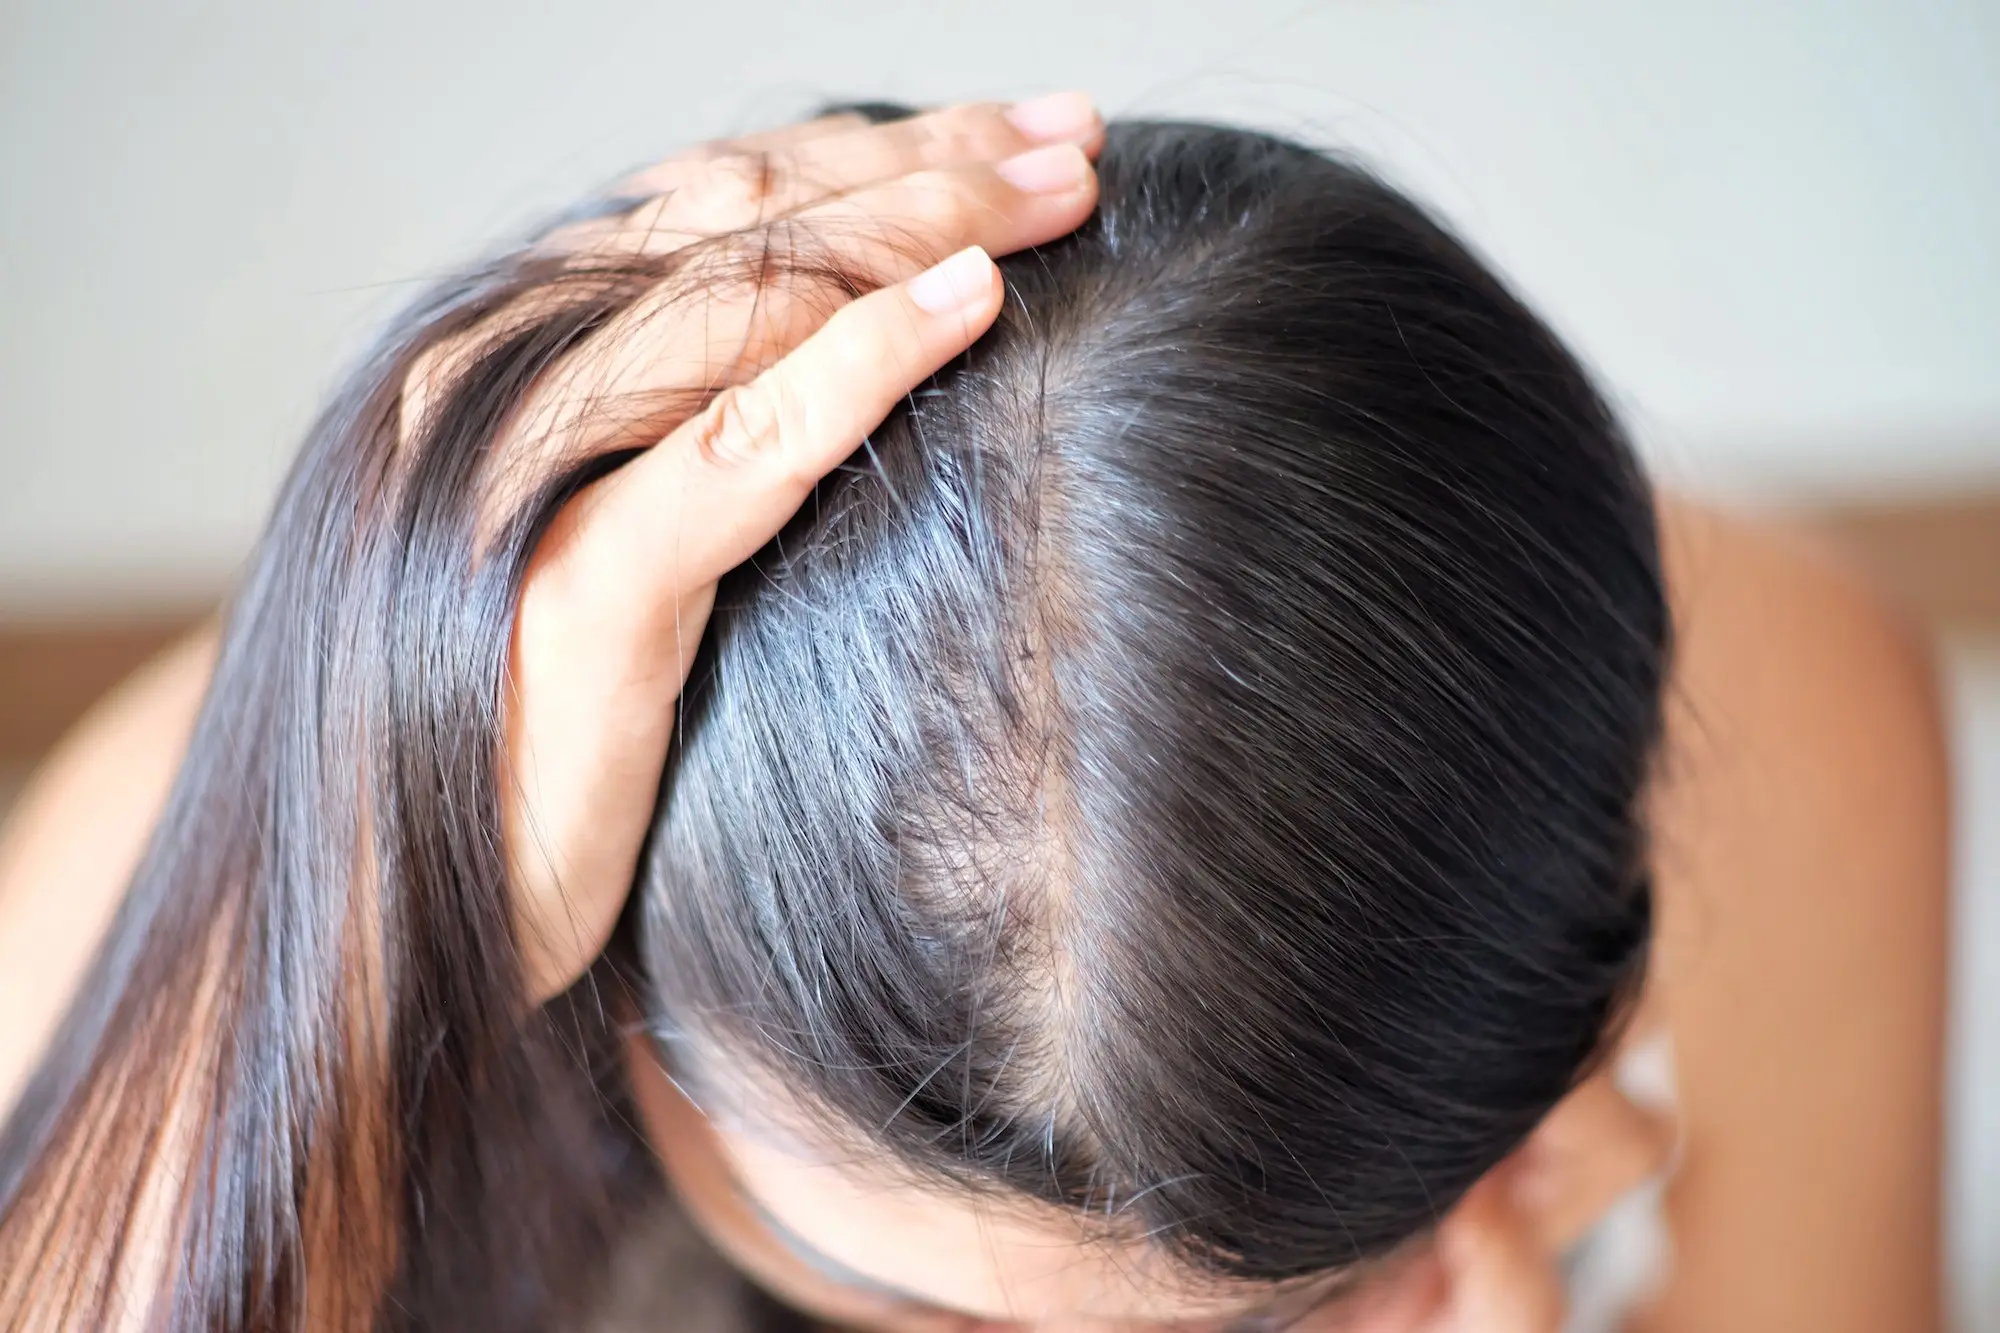 Female Hair Loss and the Social Stigma That Goes With It